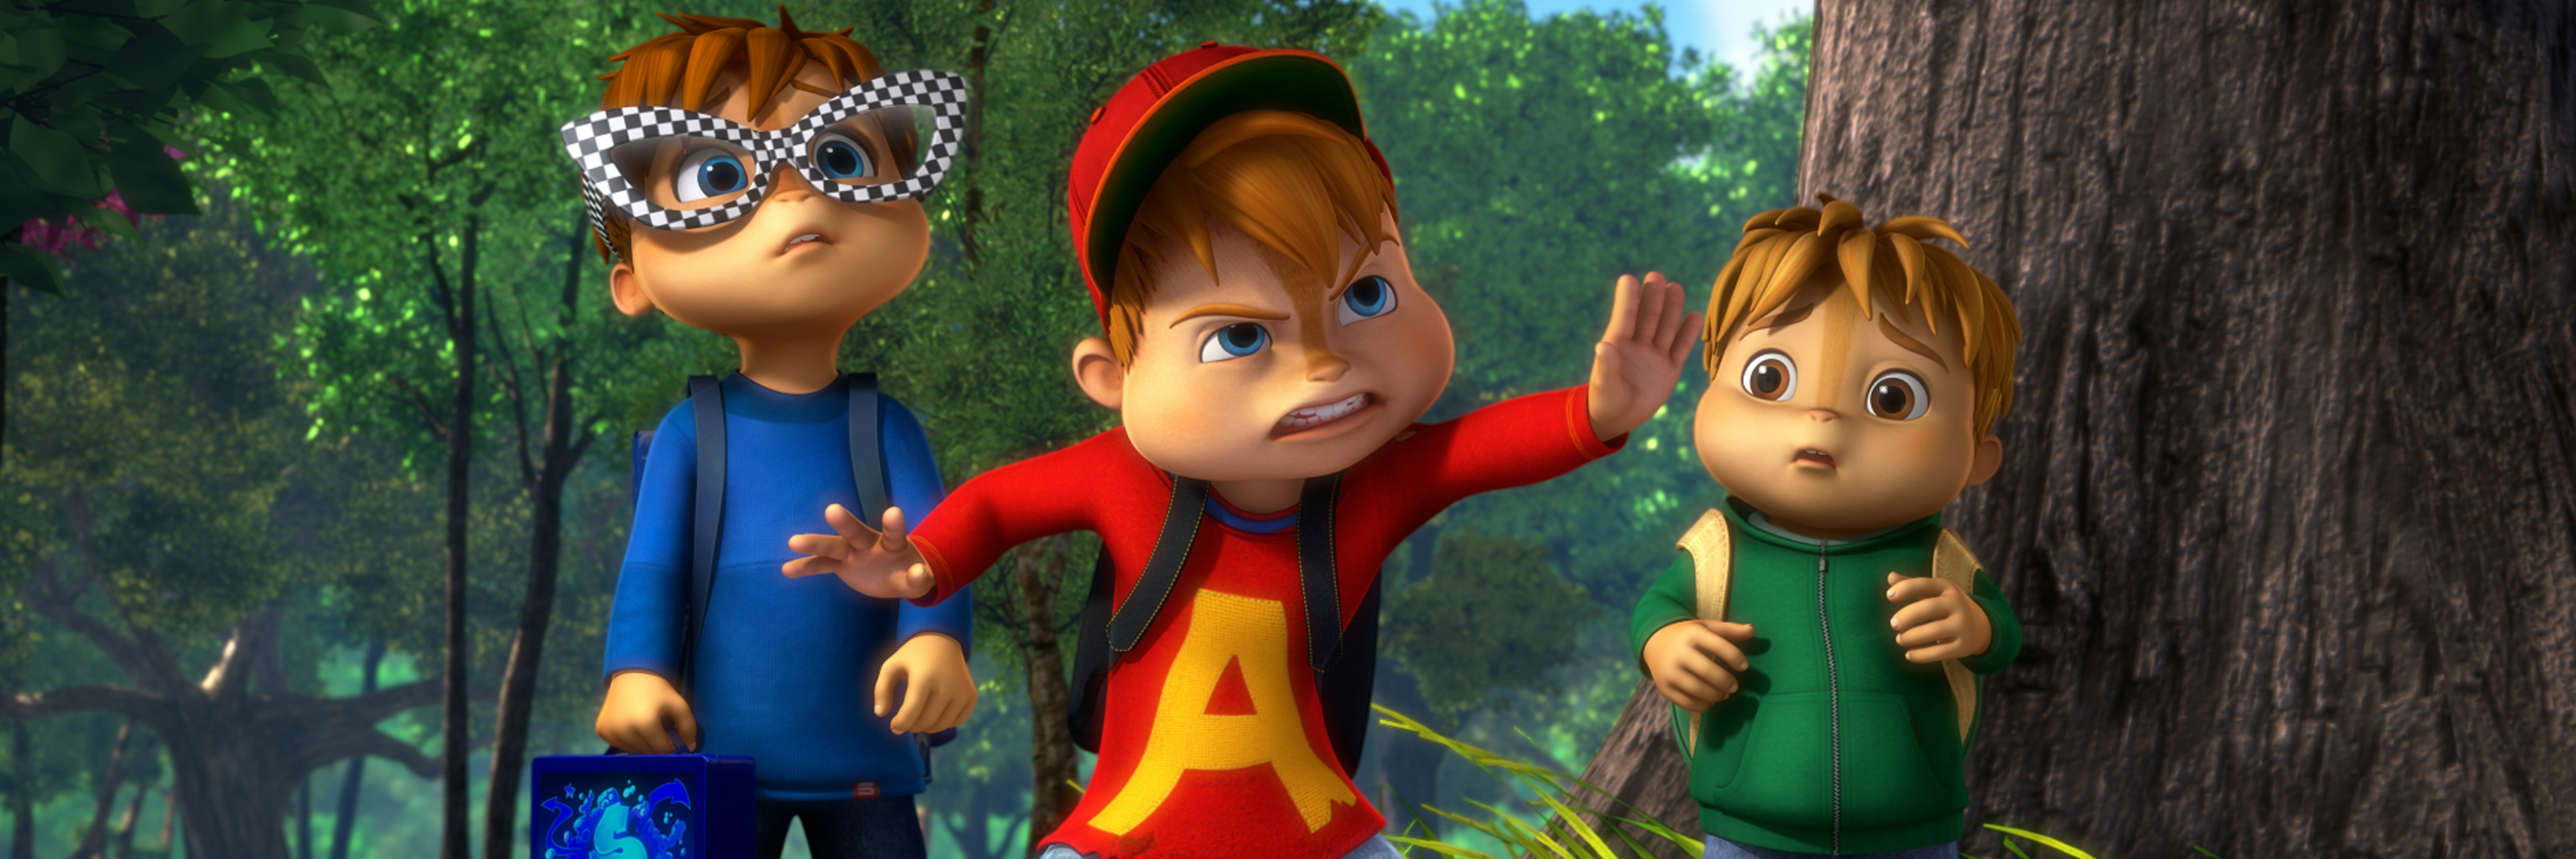 Alvin and the Chipmunks: The Squeakquel | 